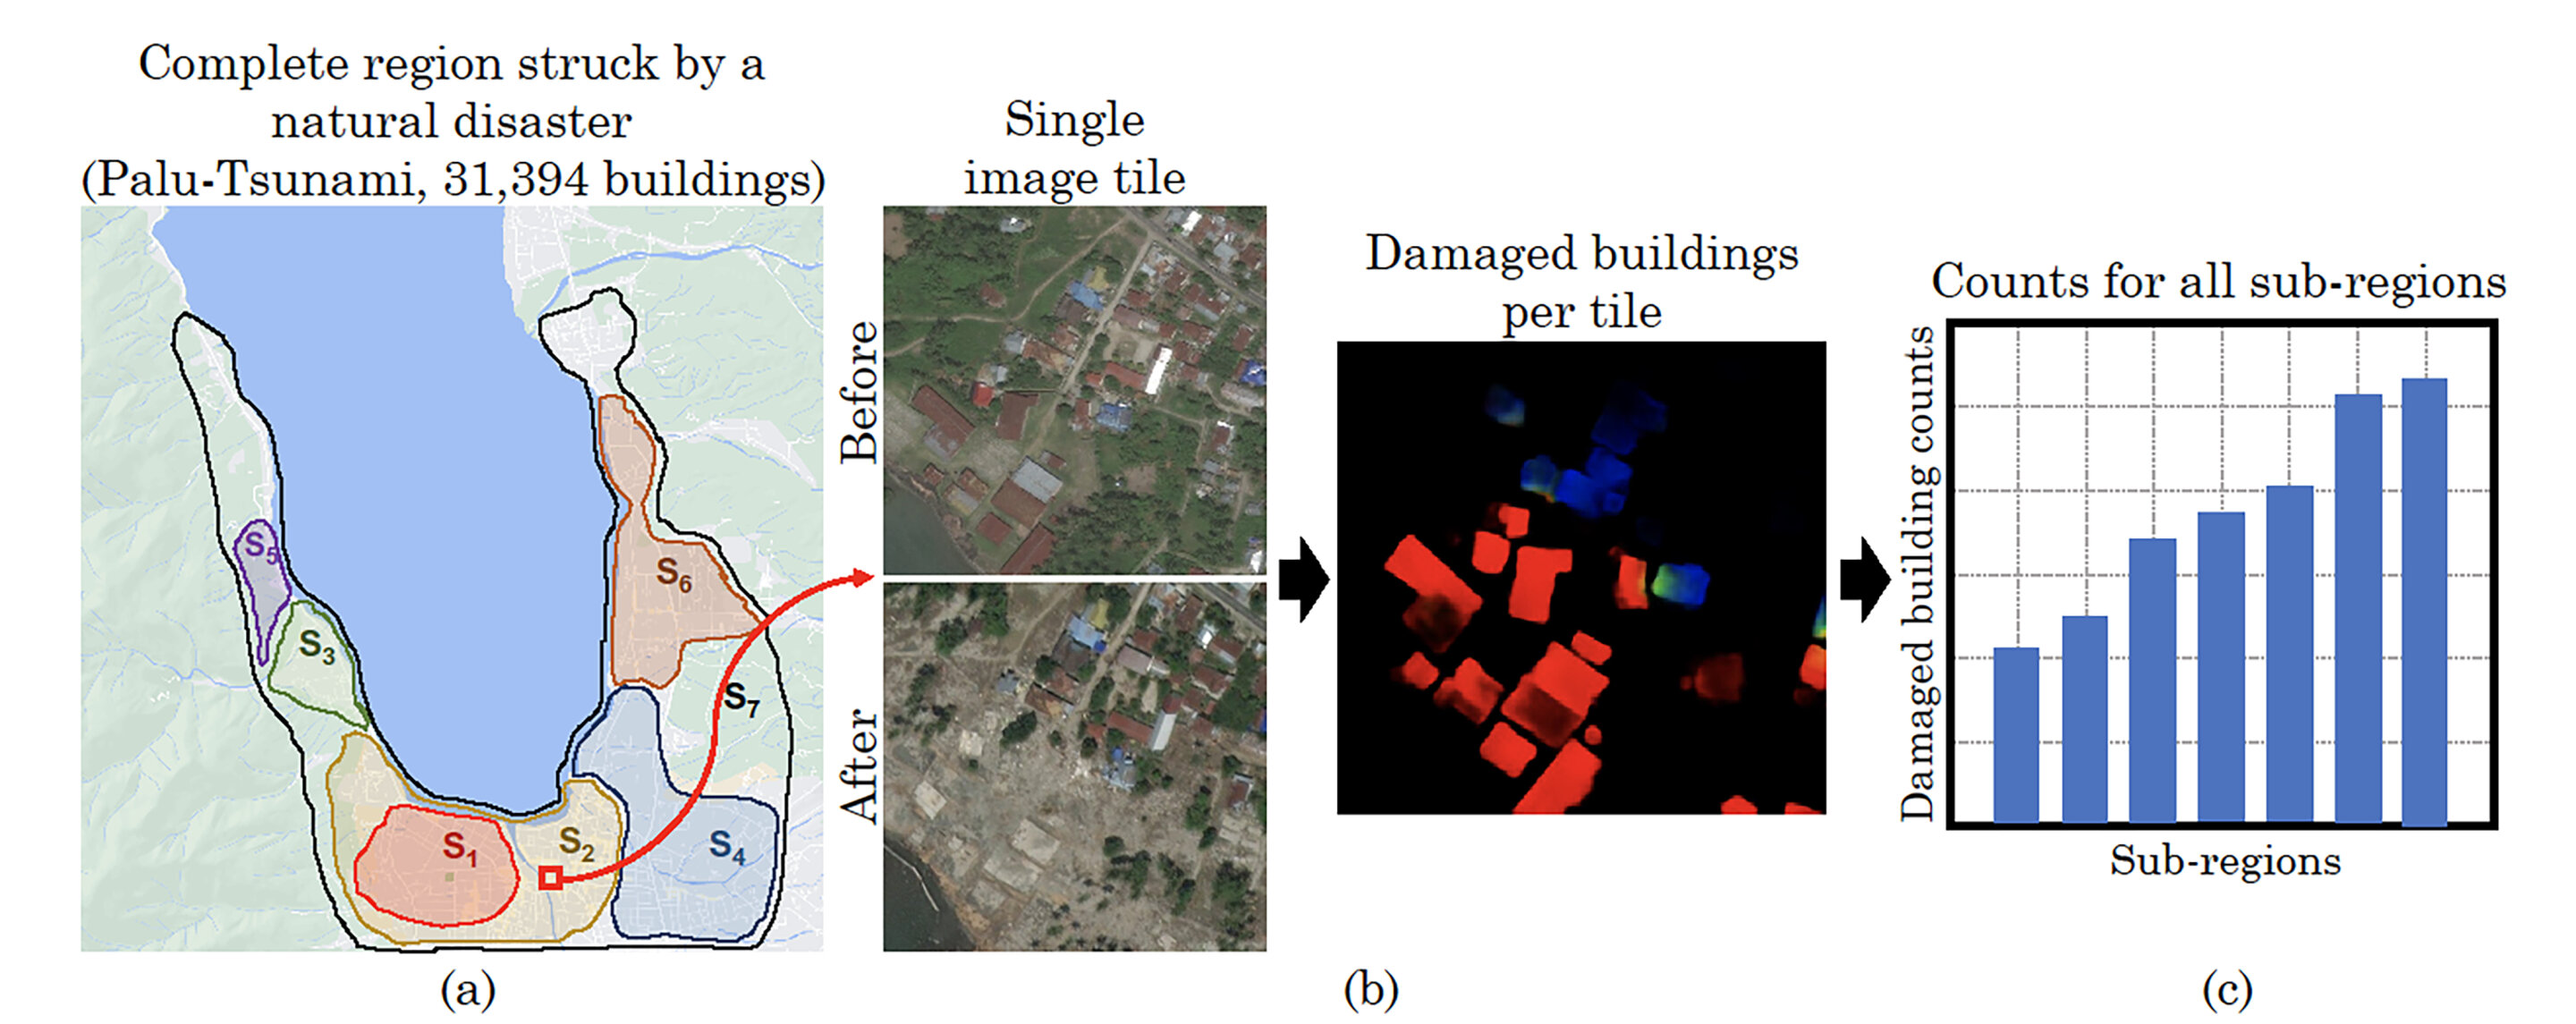 #New computer vision tool can count damaged buildings in crisis zones and accurately estimate bird flock sizes